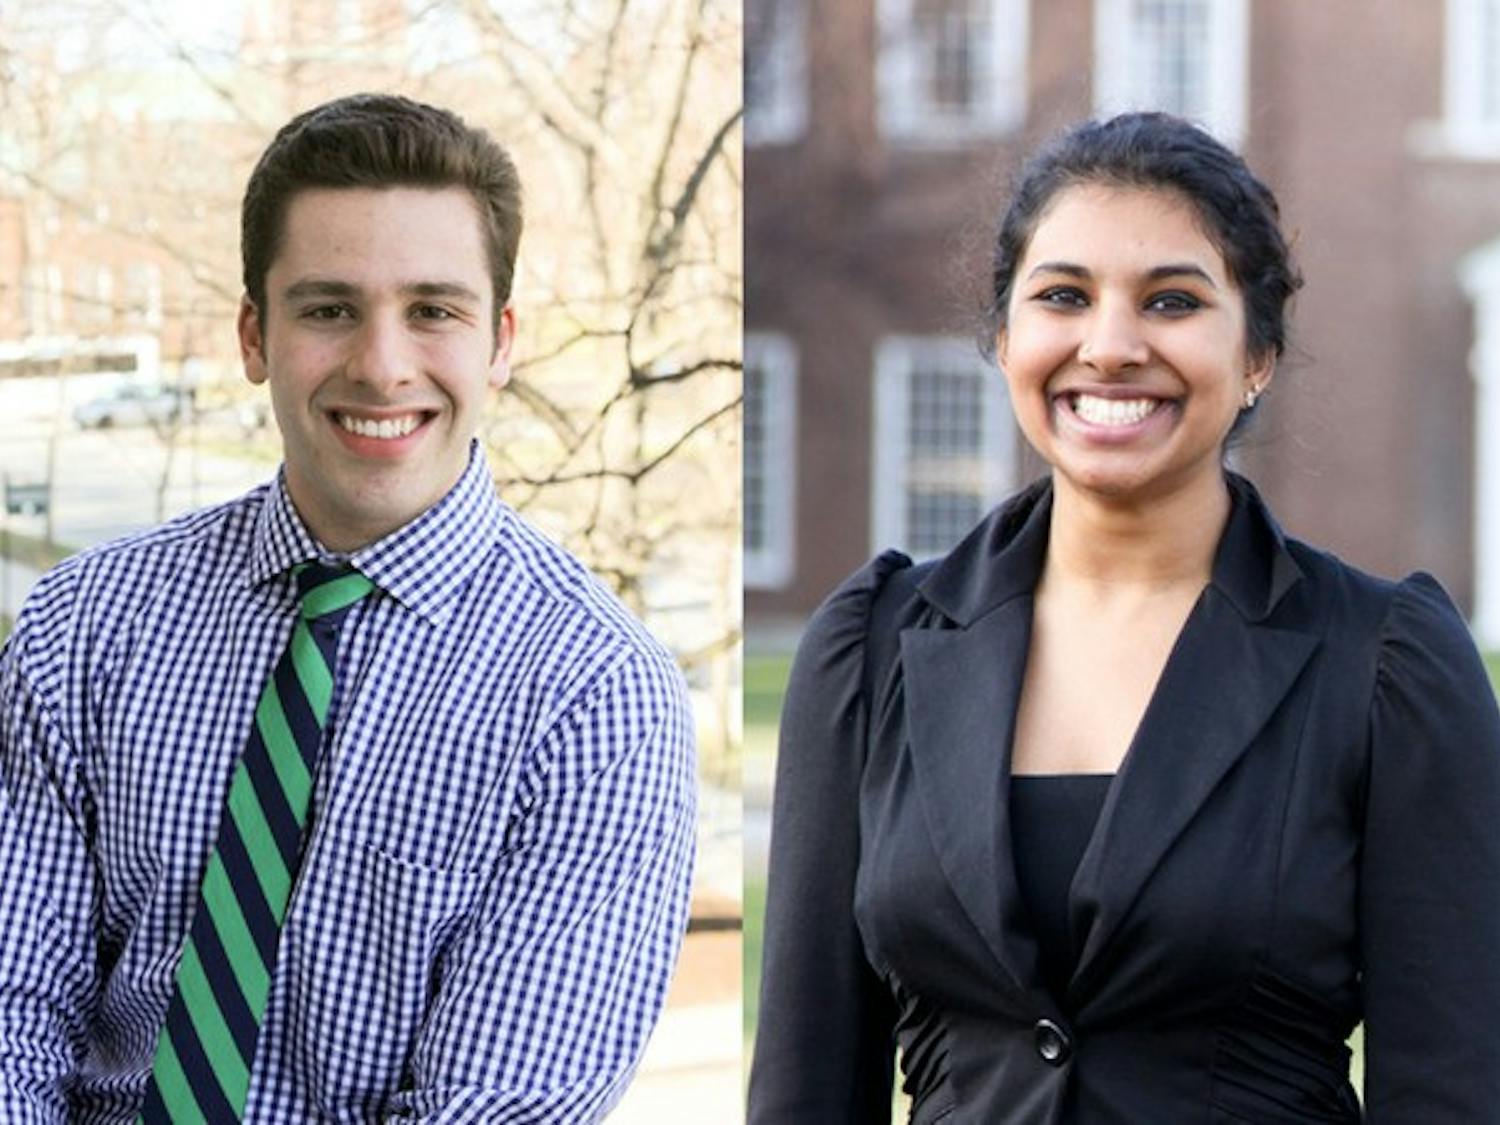 Max Yoeli '12 will serve as next year's student body president and Amrita Sankar '12 will take over as vice president.